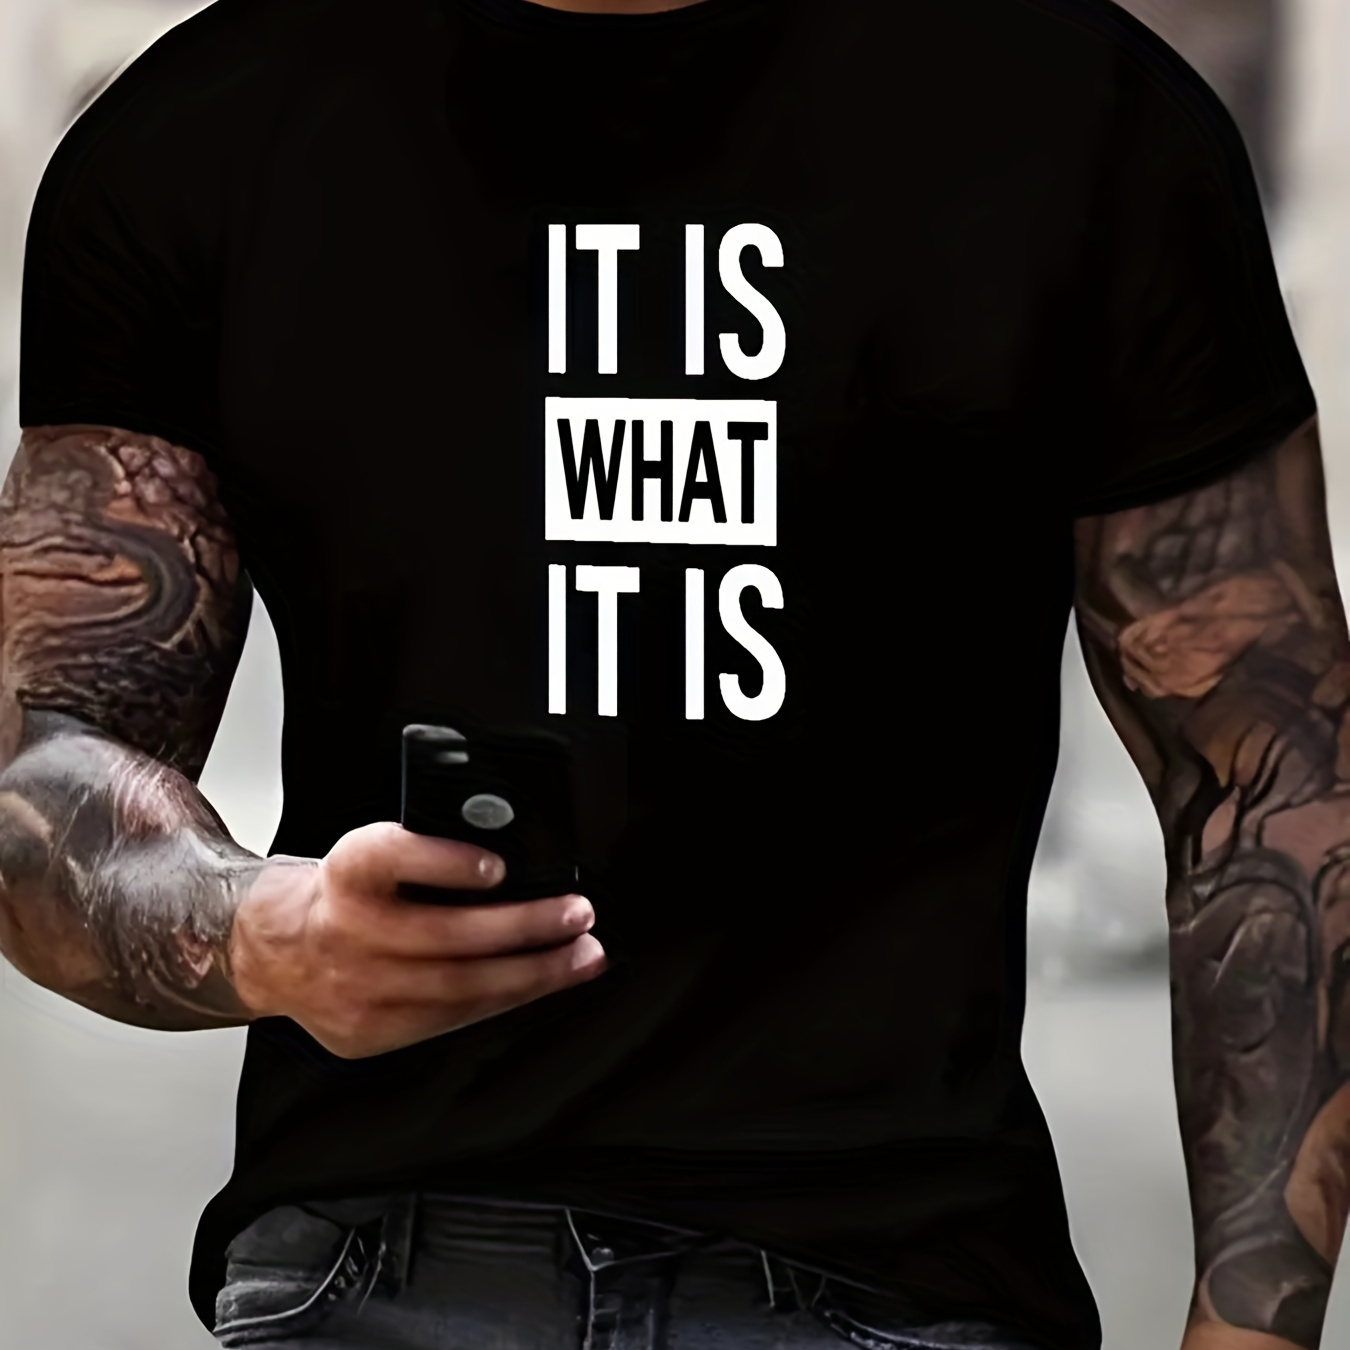 

it Is What It Is" Pattern Print Men's Comfy T-shirt, Graphic Tee Men's Summer Outdoor Clothes, Men's Clothing, Tops For Men, Gift For Men